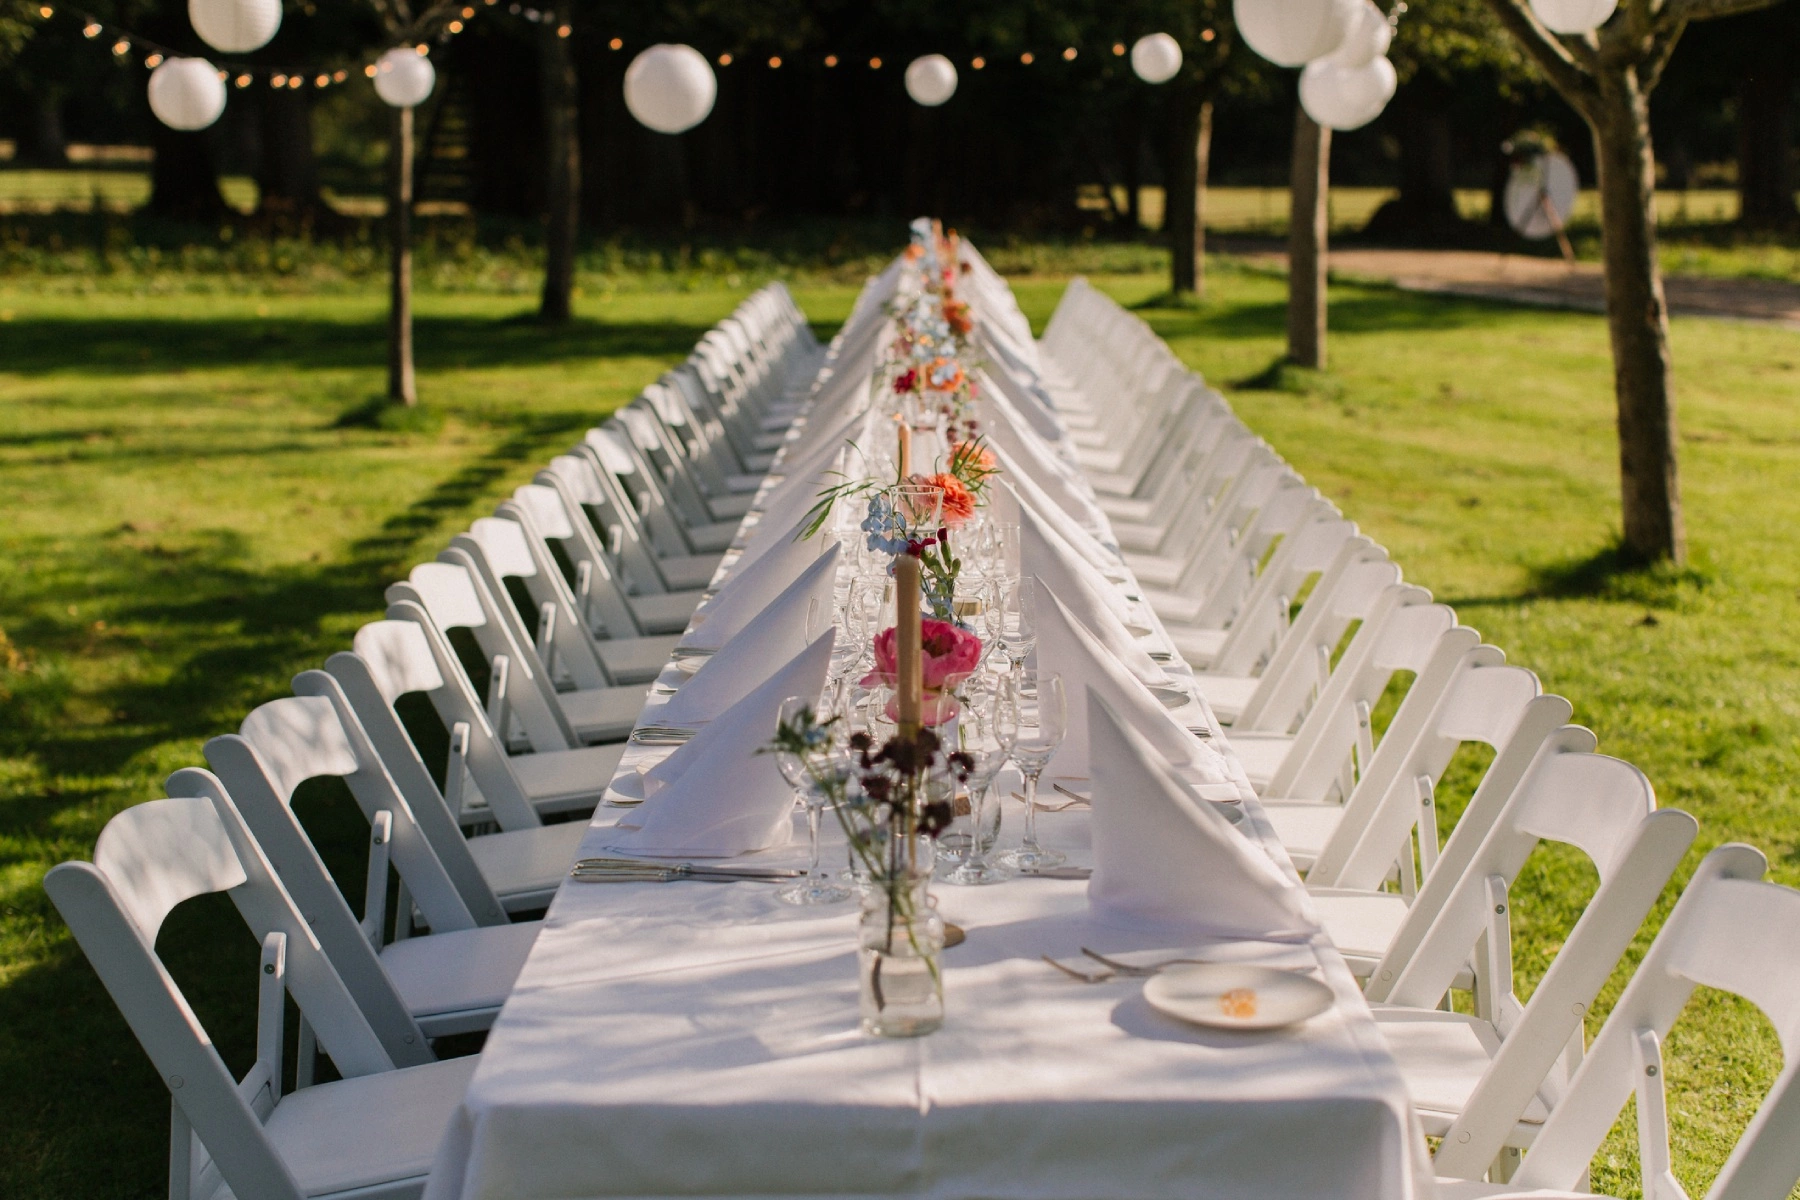 a beautifully styled wedding table decorated with pink flowers and white napkins sitting in the middle of a green lawn on a sunny afternoon